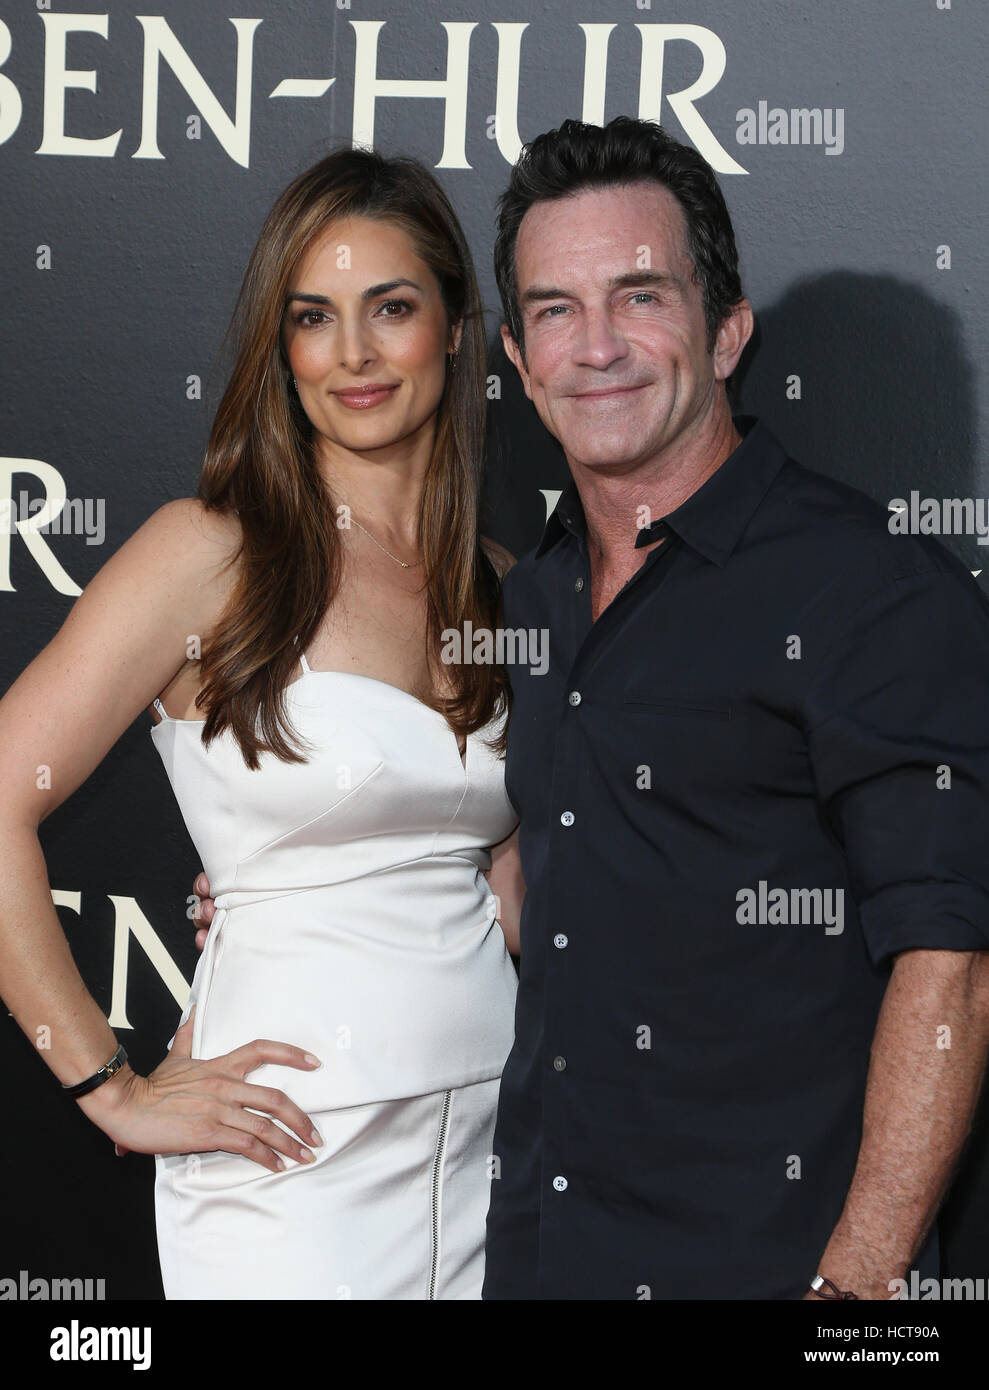 Los Angeles Premiere of 'Ben-Hur' held at the TCL Chinese Theater IMAX - Arrivals  Featuring: Jeff Probst, Lisa Ann Russell Where: Hollywood, California, United States When: 16 Aug 2016 Stock Photo